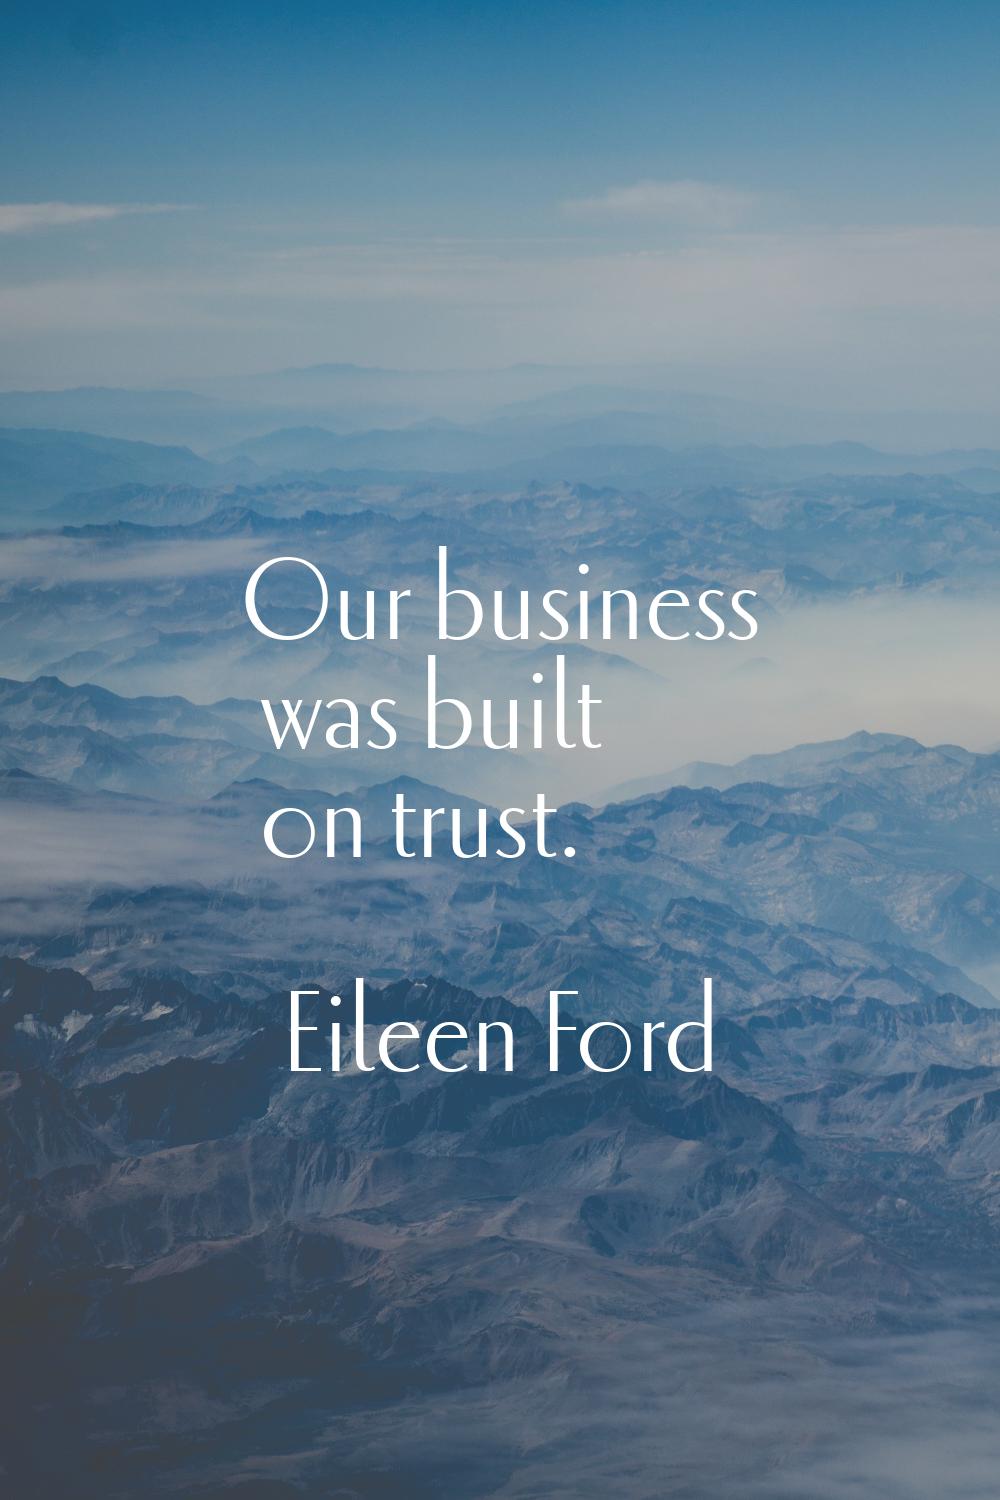 Our business was built on trust.